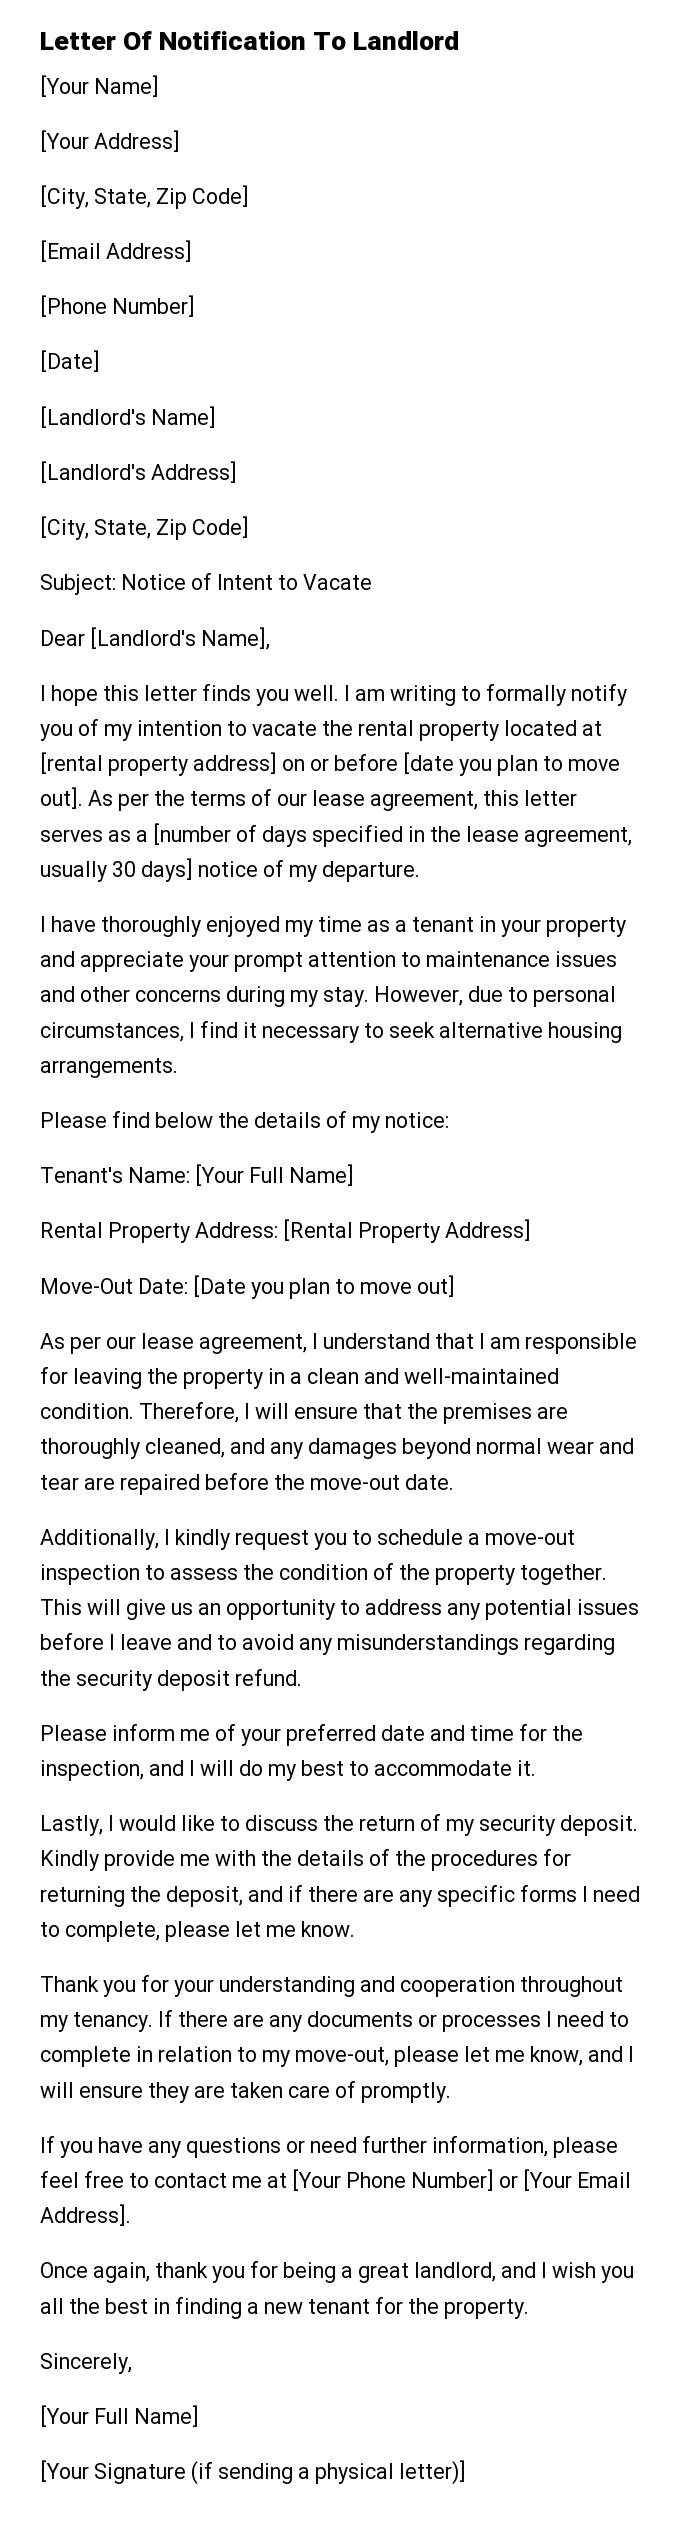 Letter Of Notification To Landlord